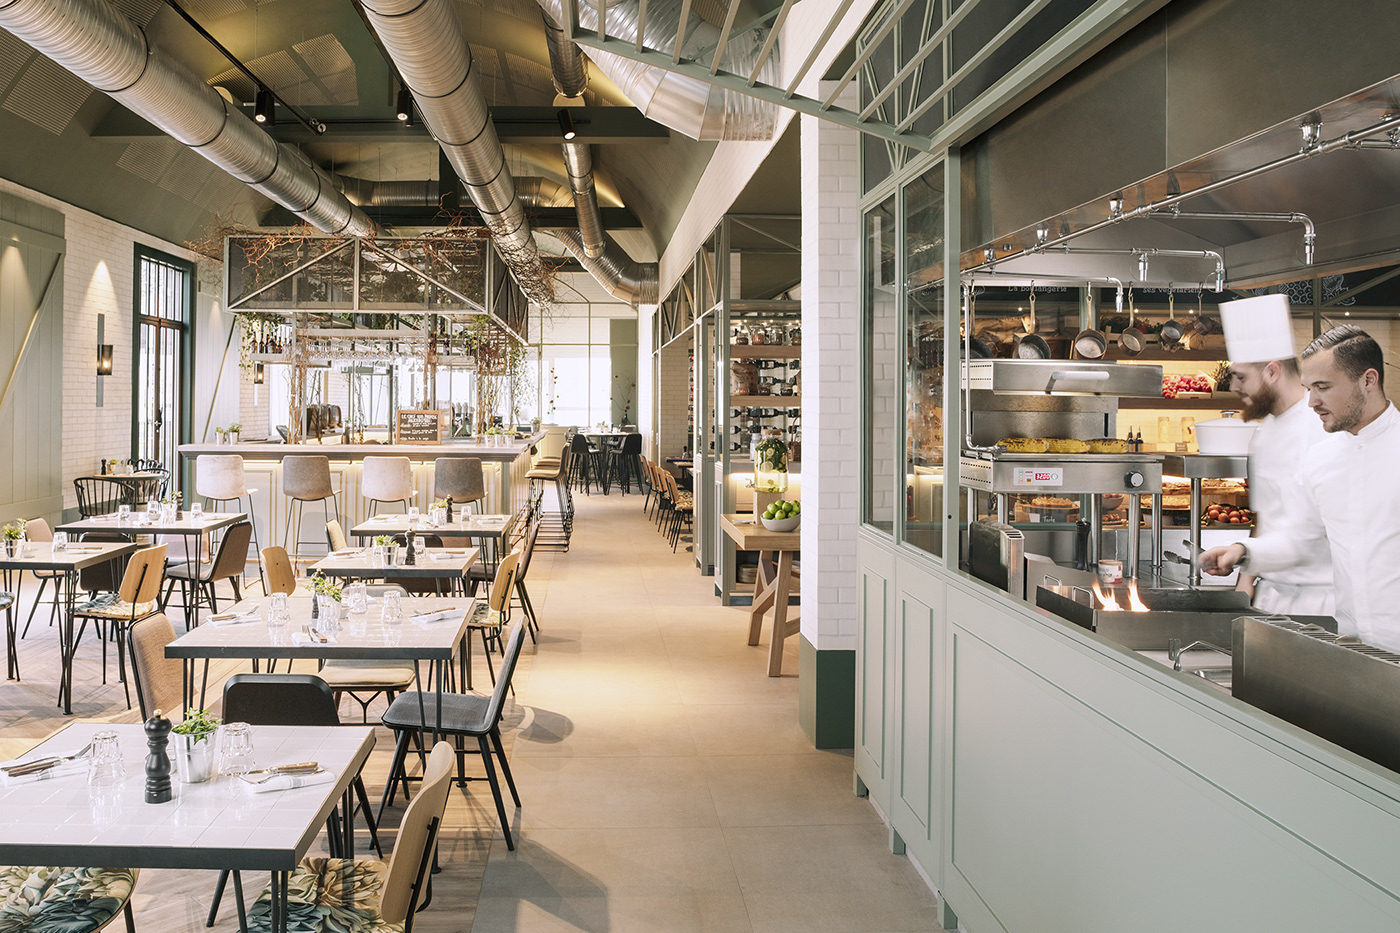 Interior view of CRAFT Market with its open kitchen where chefs are cooking dishes.